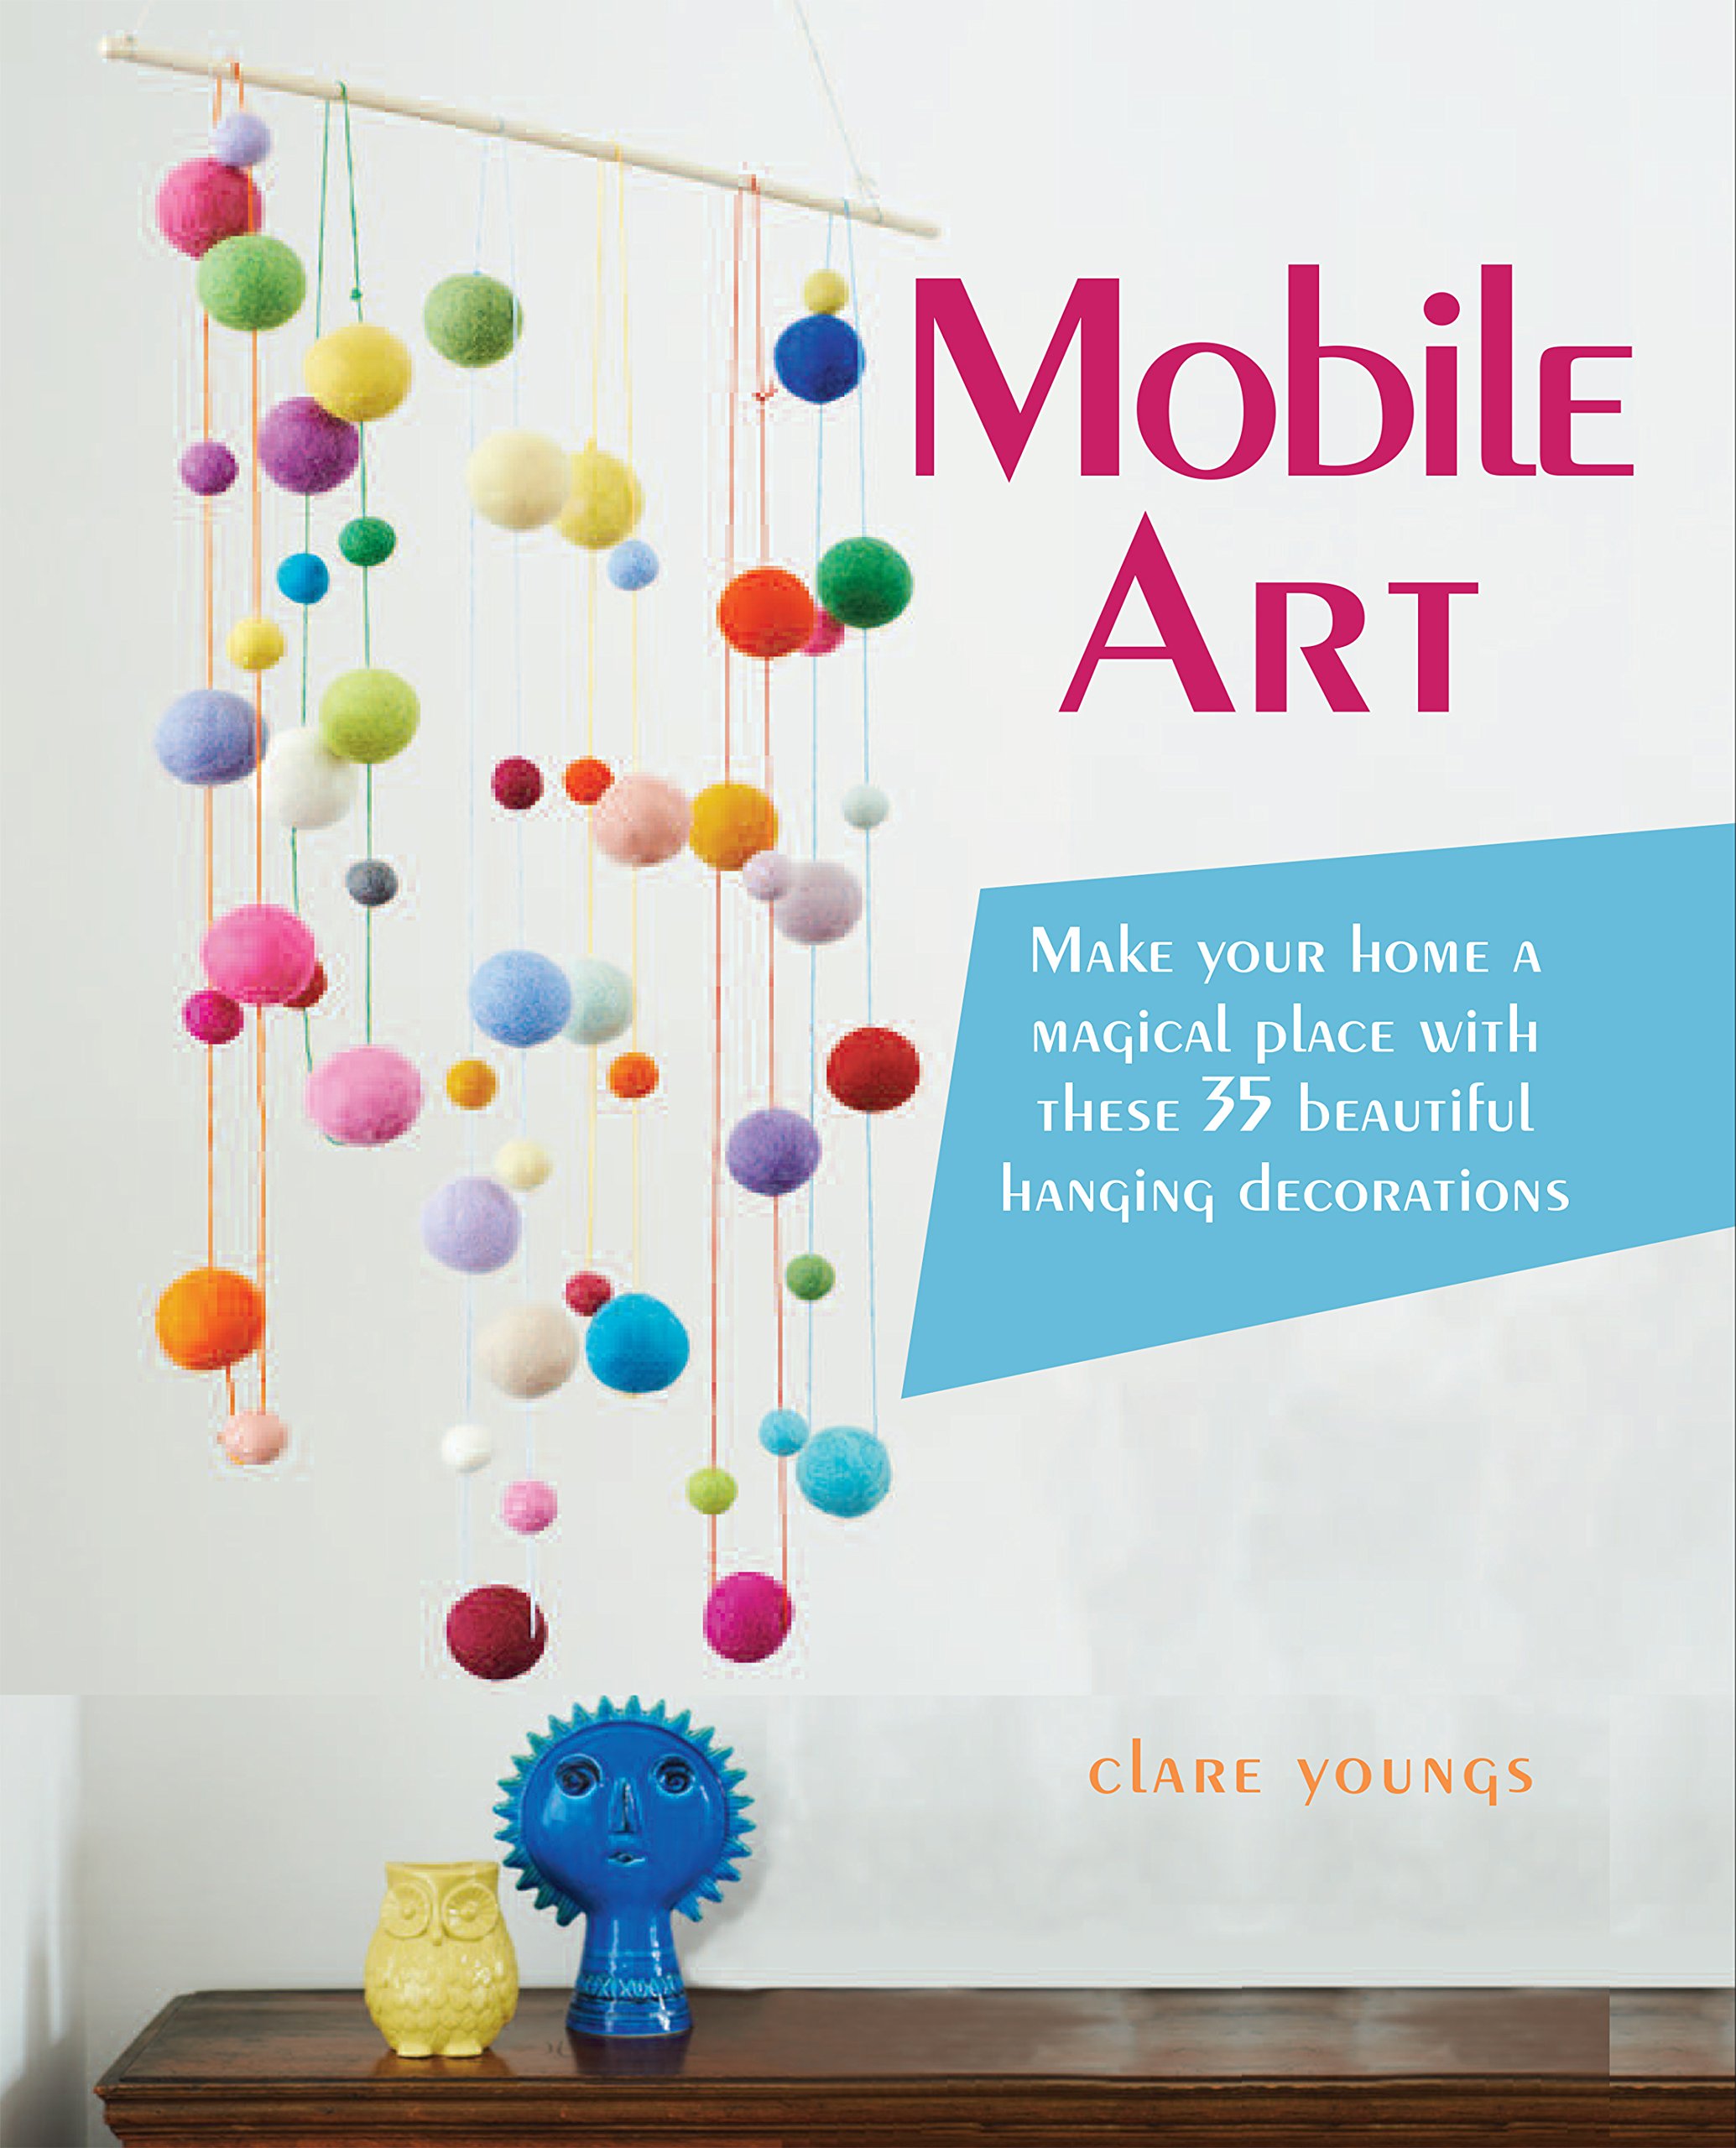 Mobile Art - Clare Youngs